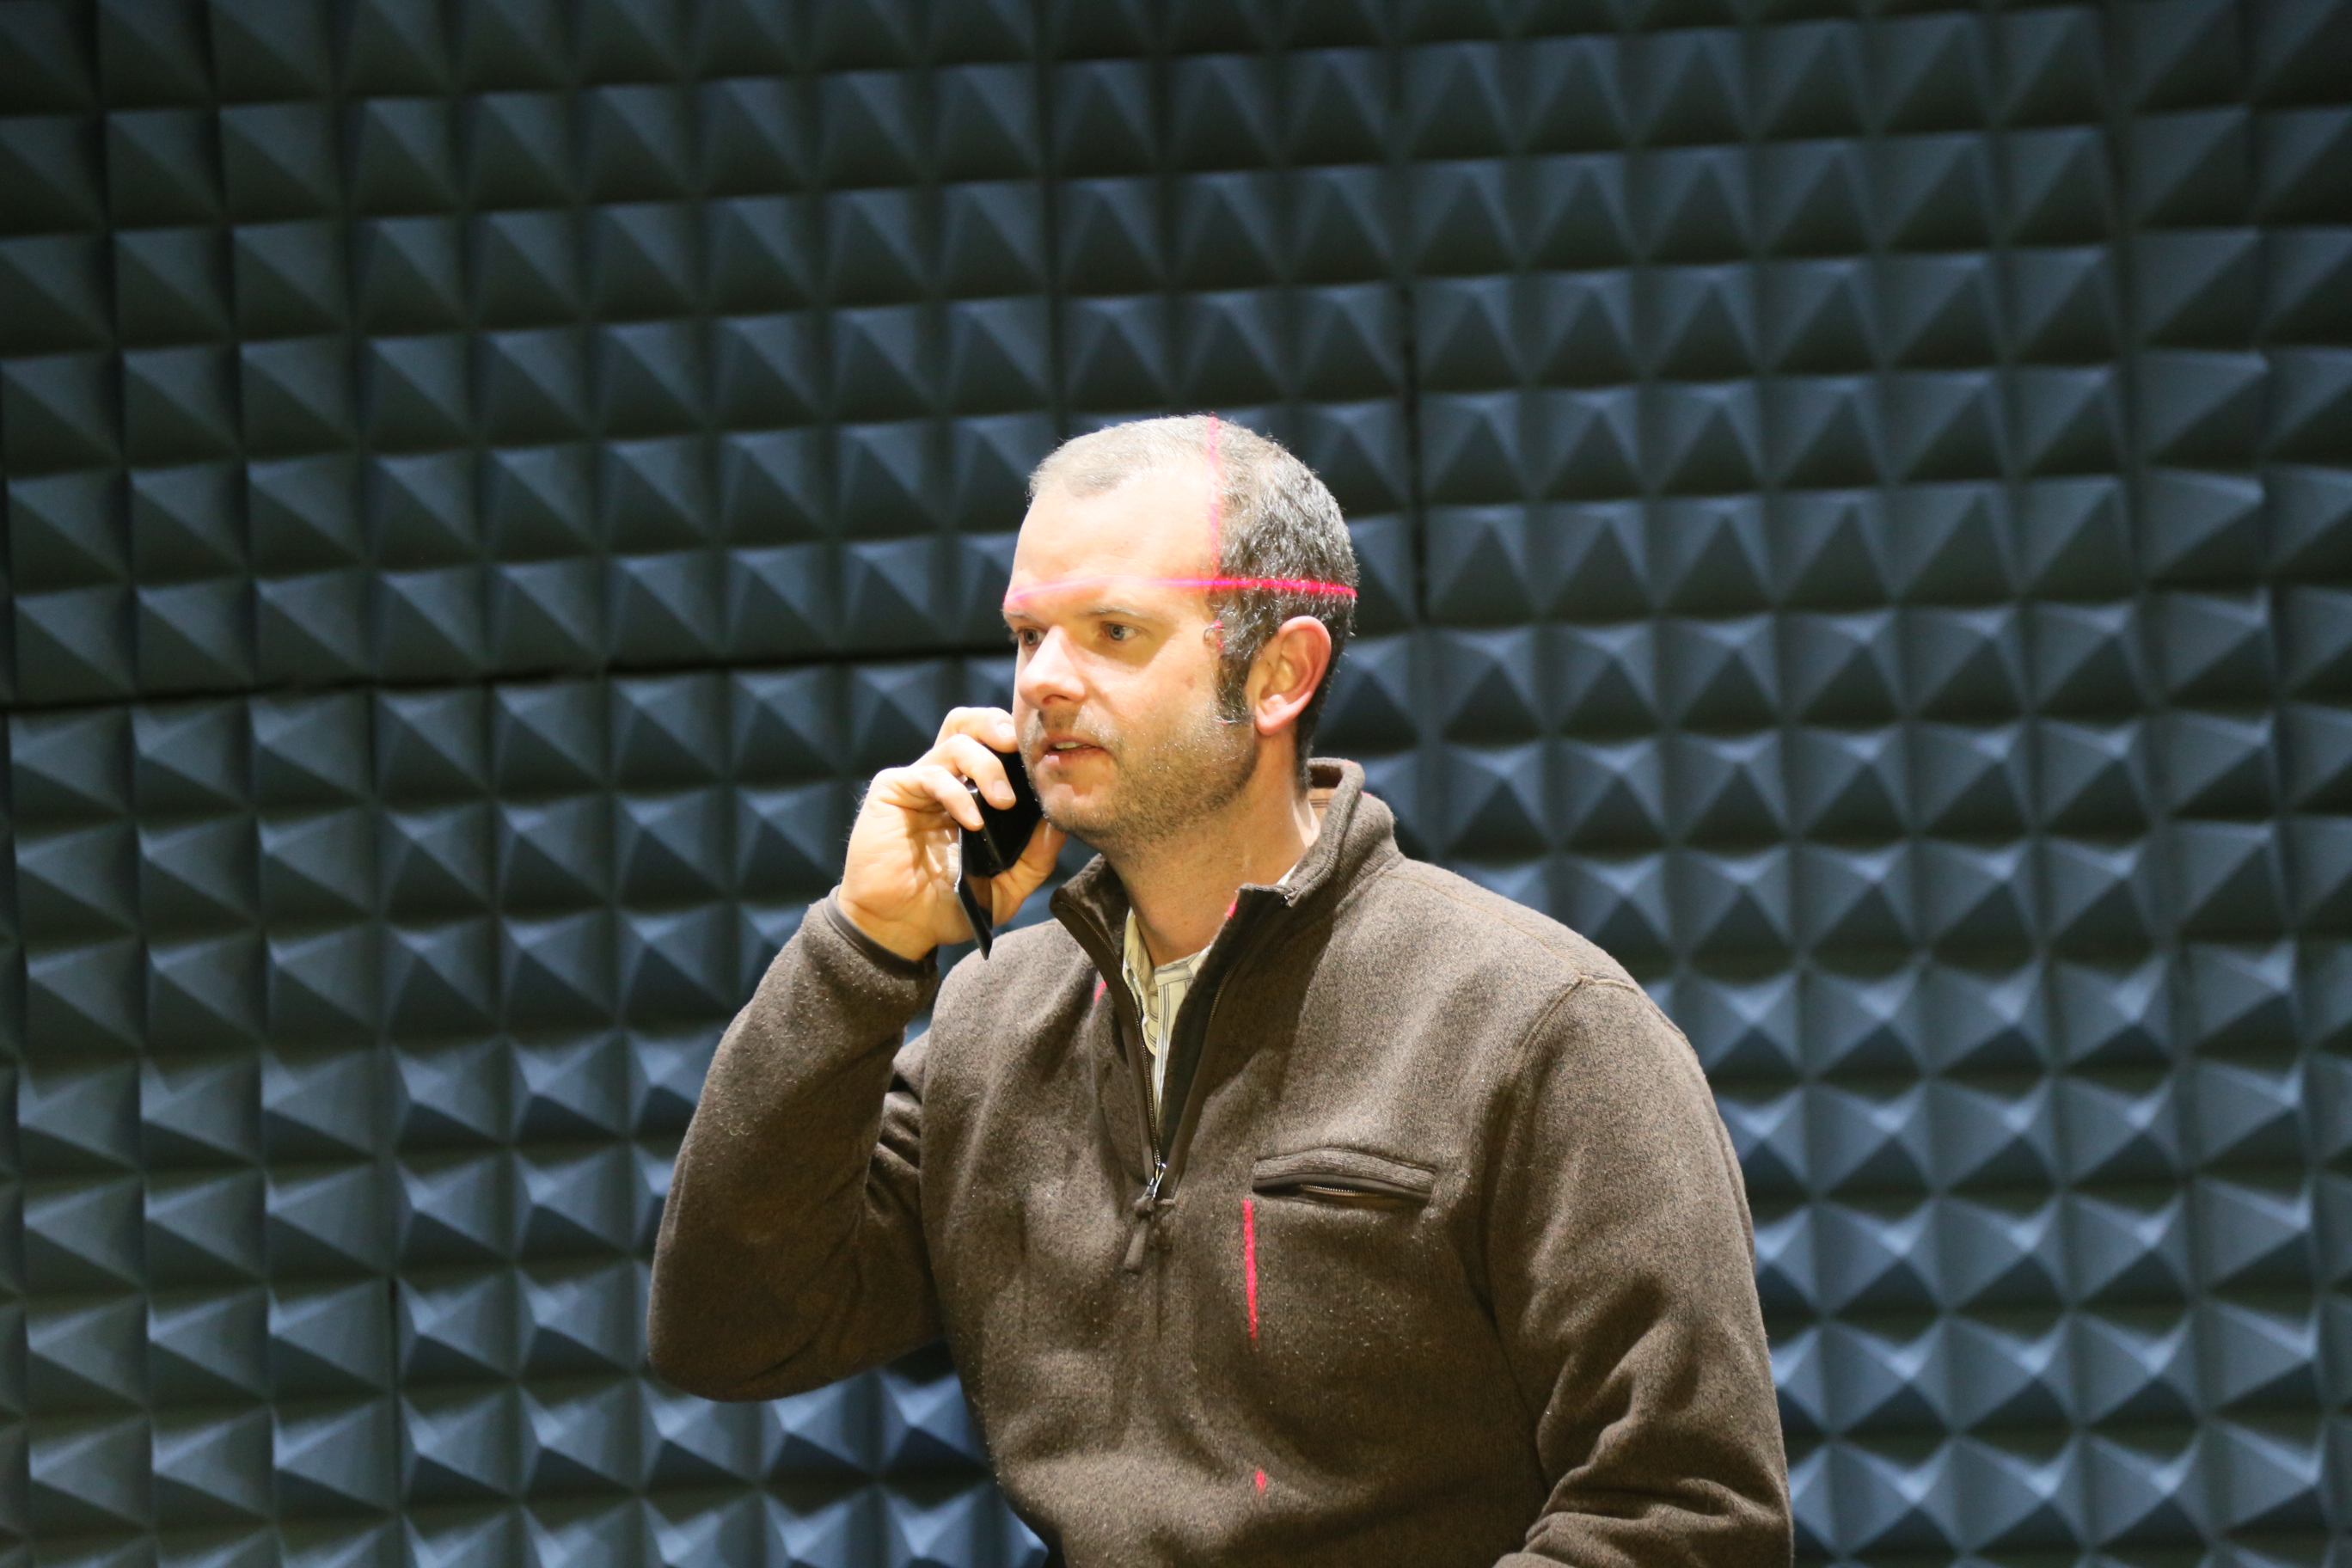 BluFlux founder and president Ben Wilmhoff testing the prototype of the patented cellphone case in the company's testing chamber